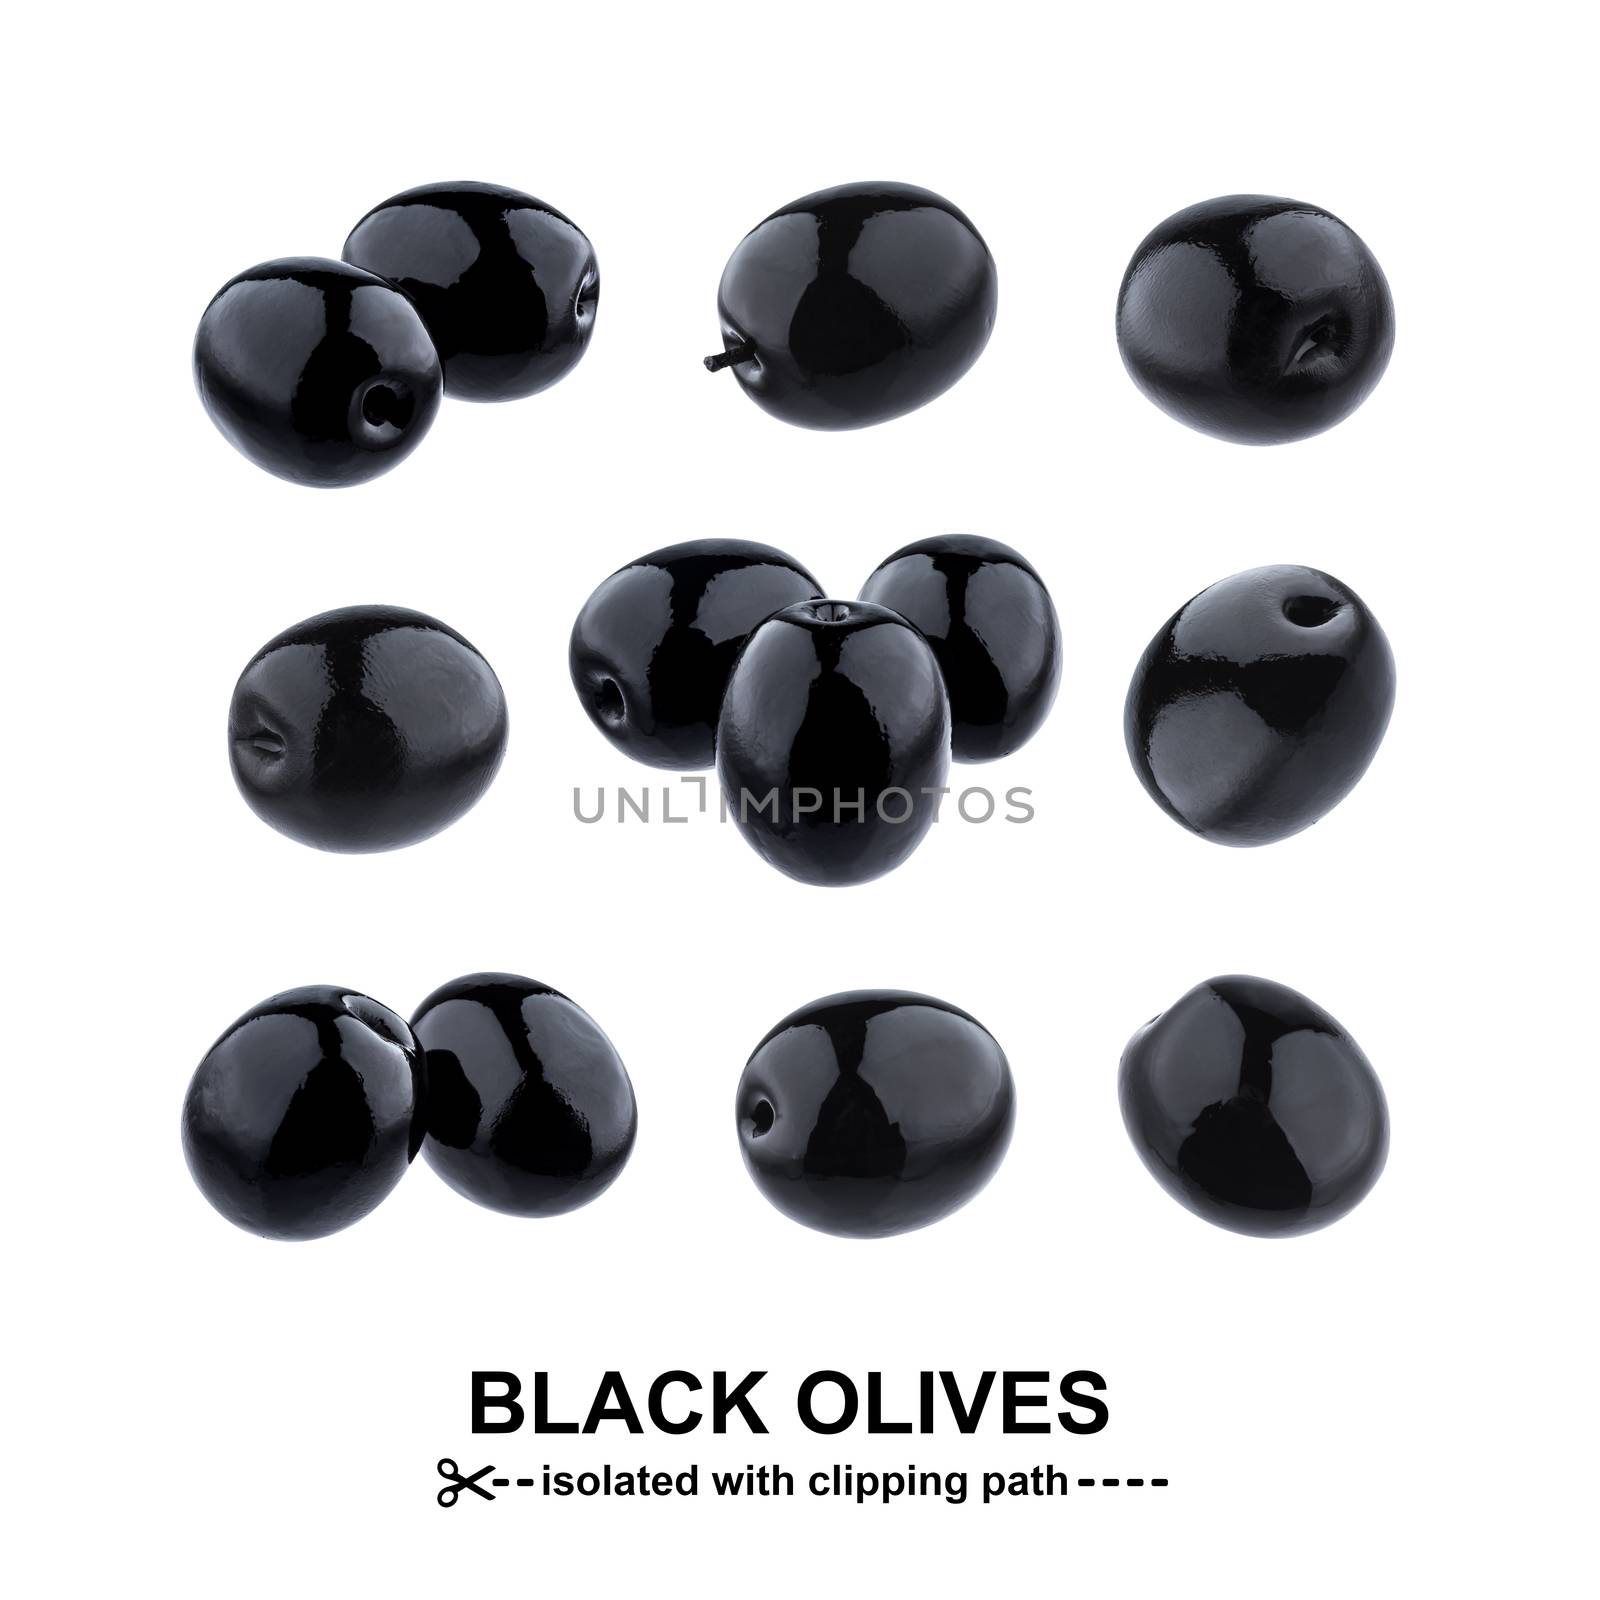 Black olives isolated on white background with clipping path. Collection by xamtiw